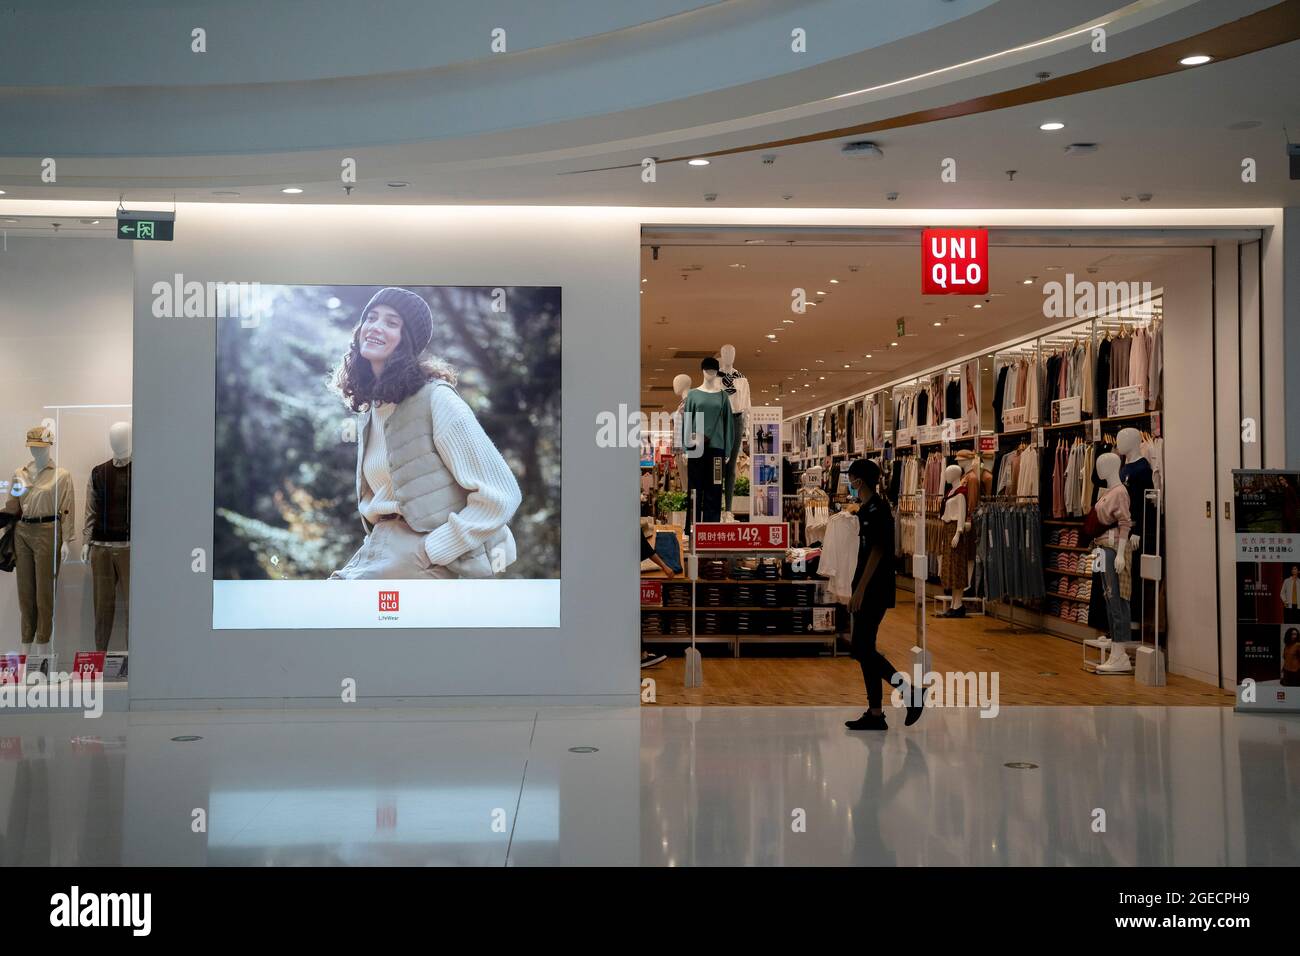 A UNIQLO store in a shopping mall Stock Photo - Alamy